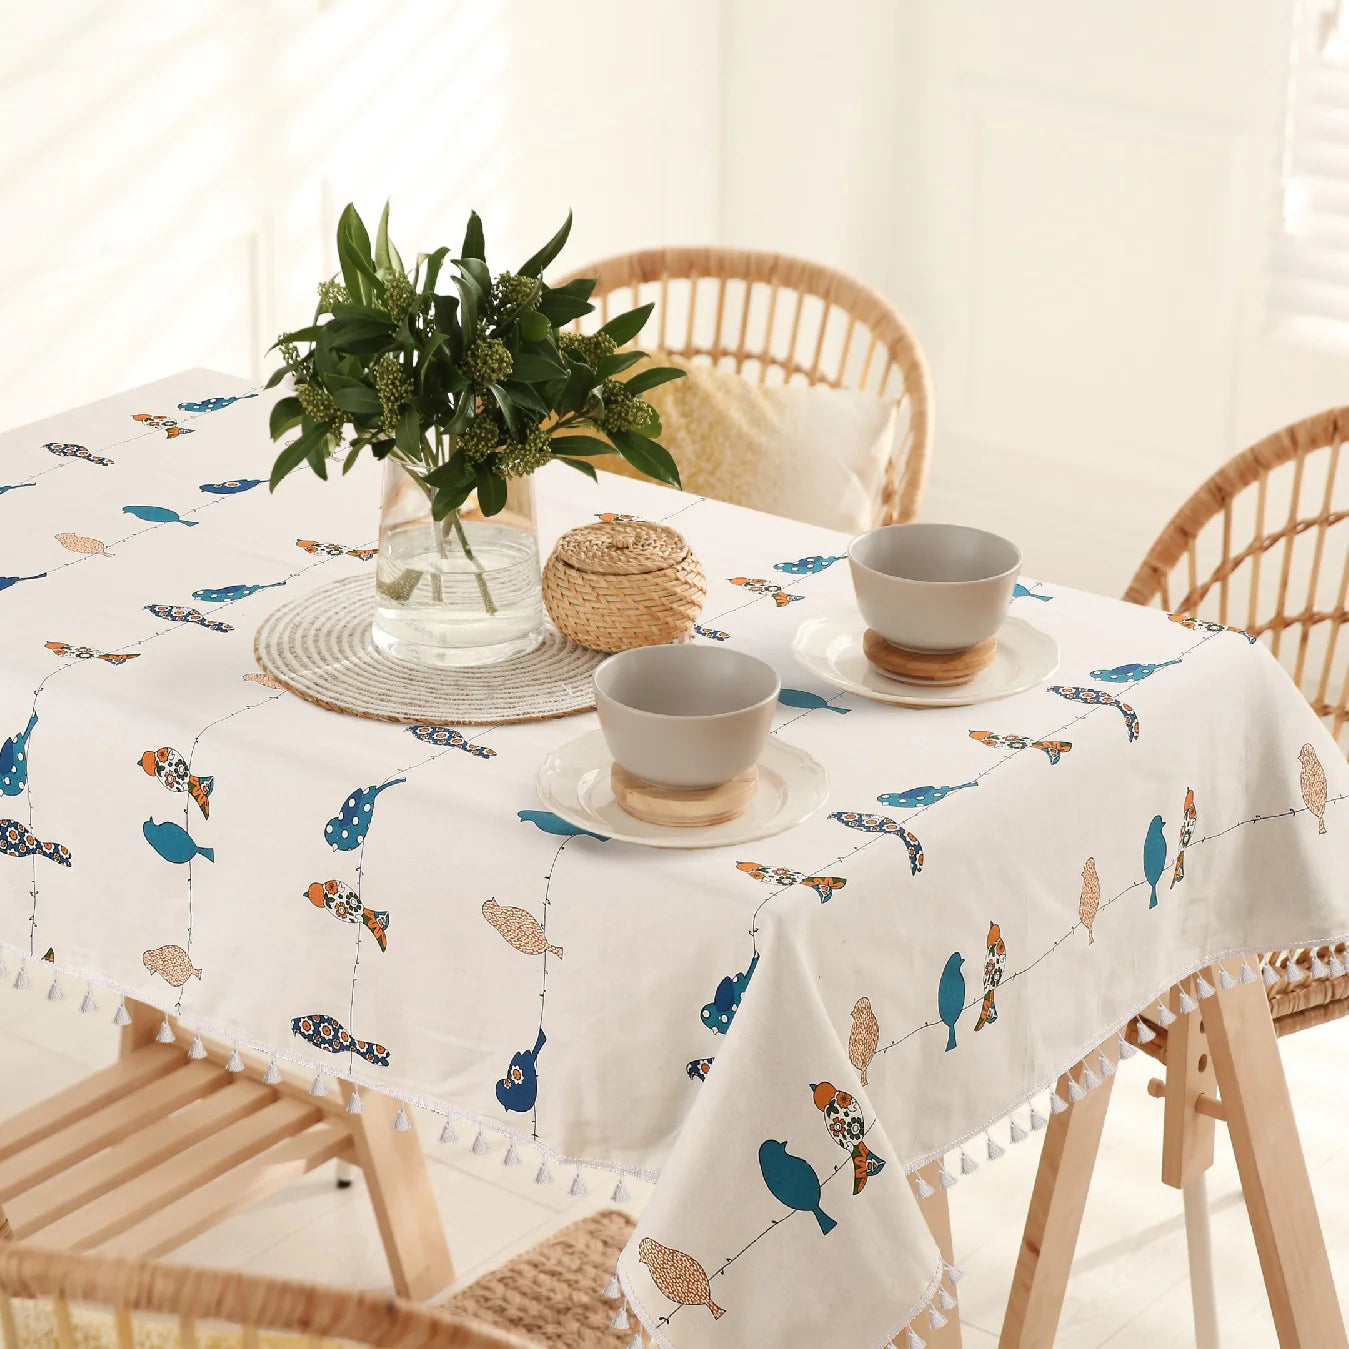 What's In and Out? For Table Cover Trends 2023